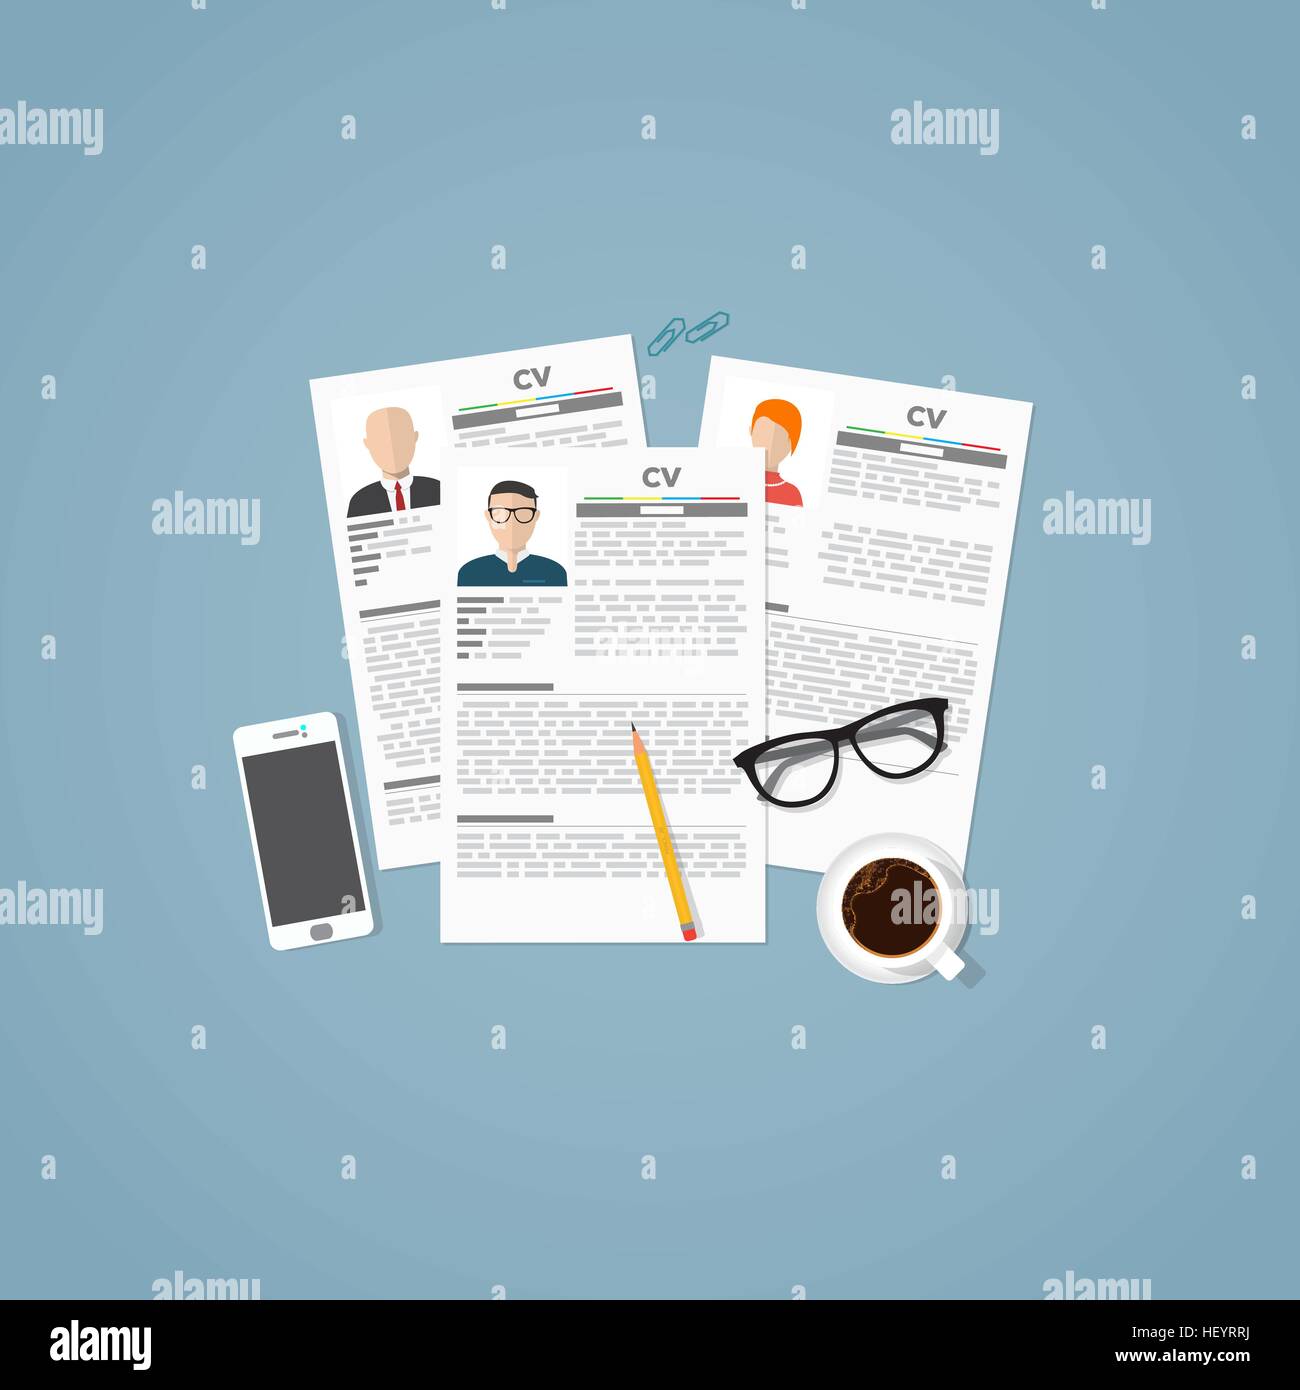 Curriculum vitae job papers with personal info and picture. Job business interview concept with candidats resume and objects. Stock Vector